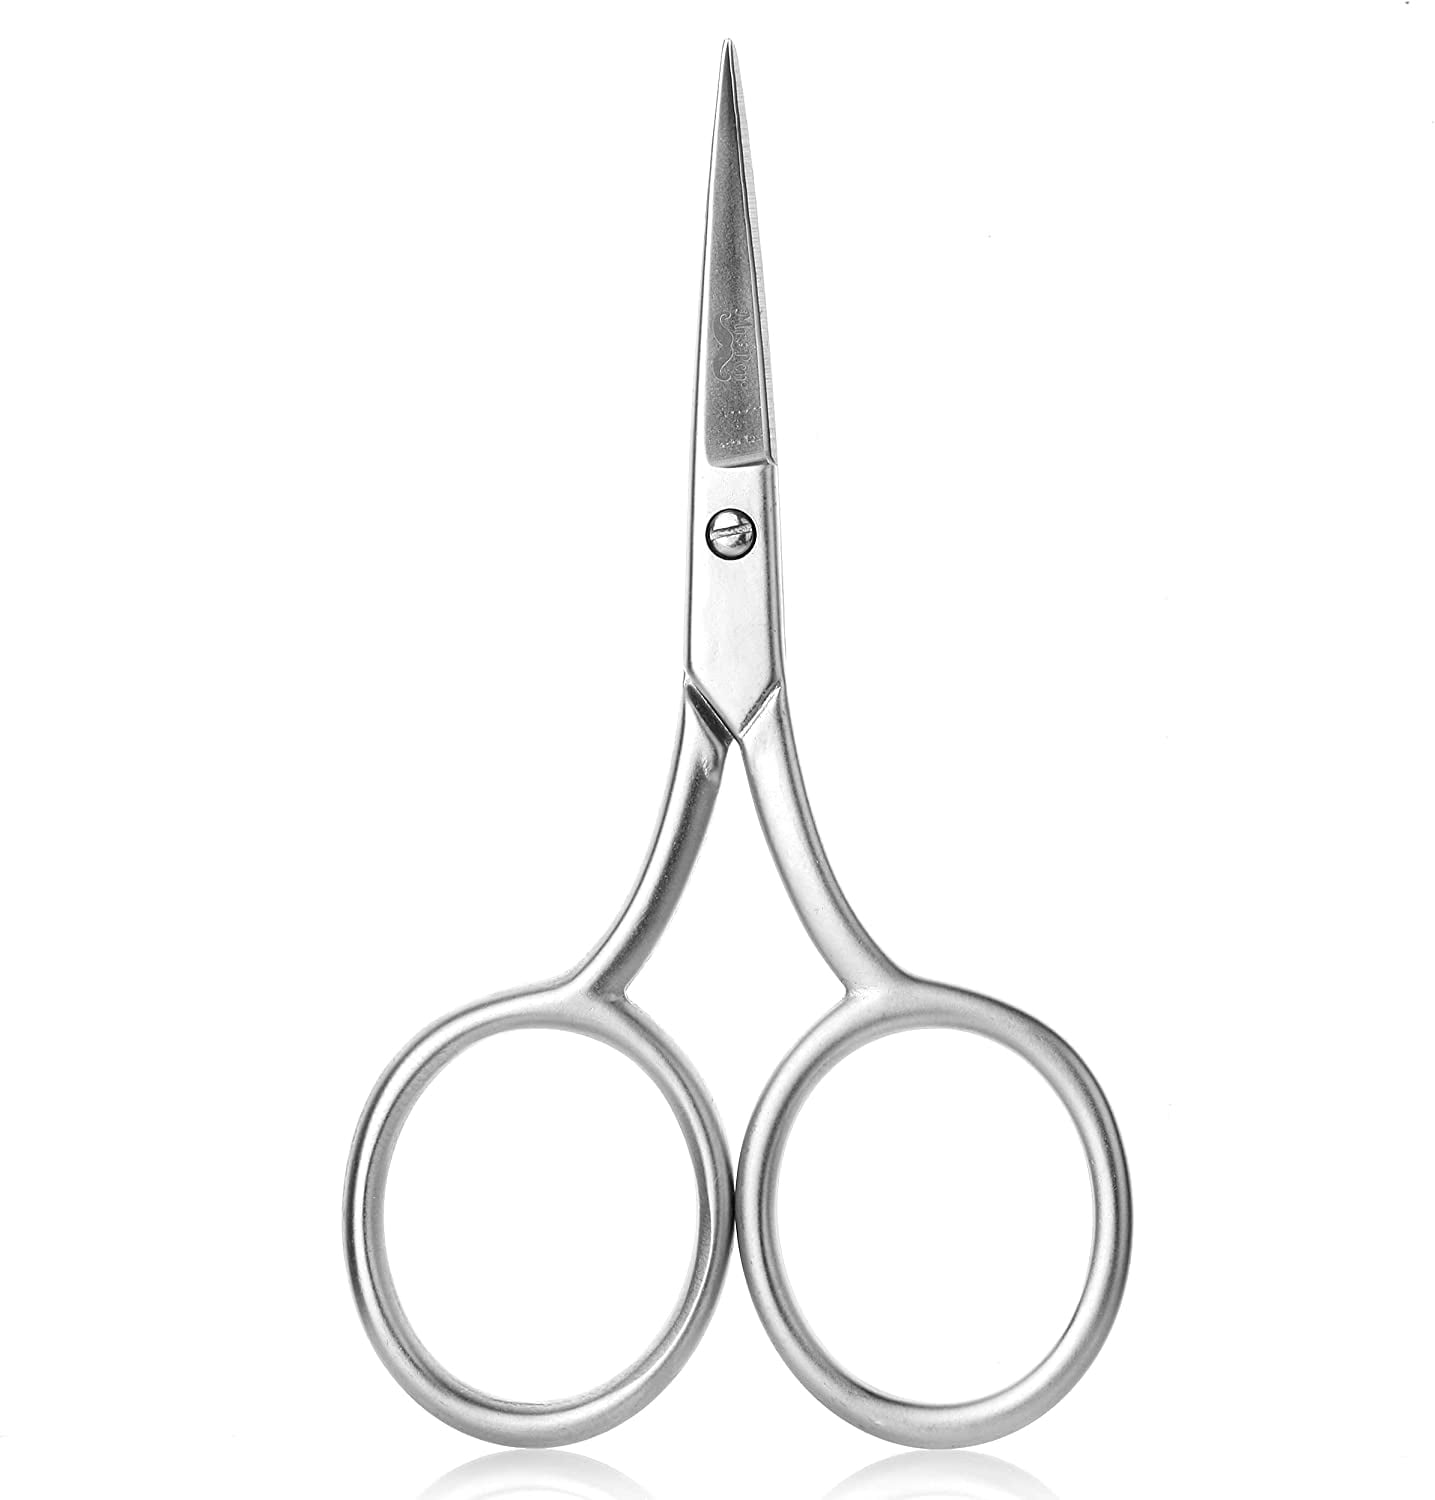 3.6 Inch Embroidery Small Sewing Scissors Stainless Steel Sharp Tip  Scissors - China Scissors and Sewing Scissors price